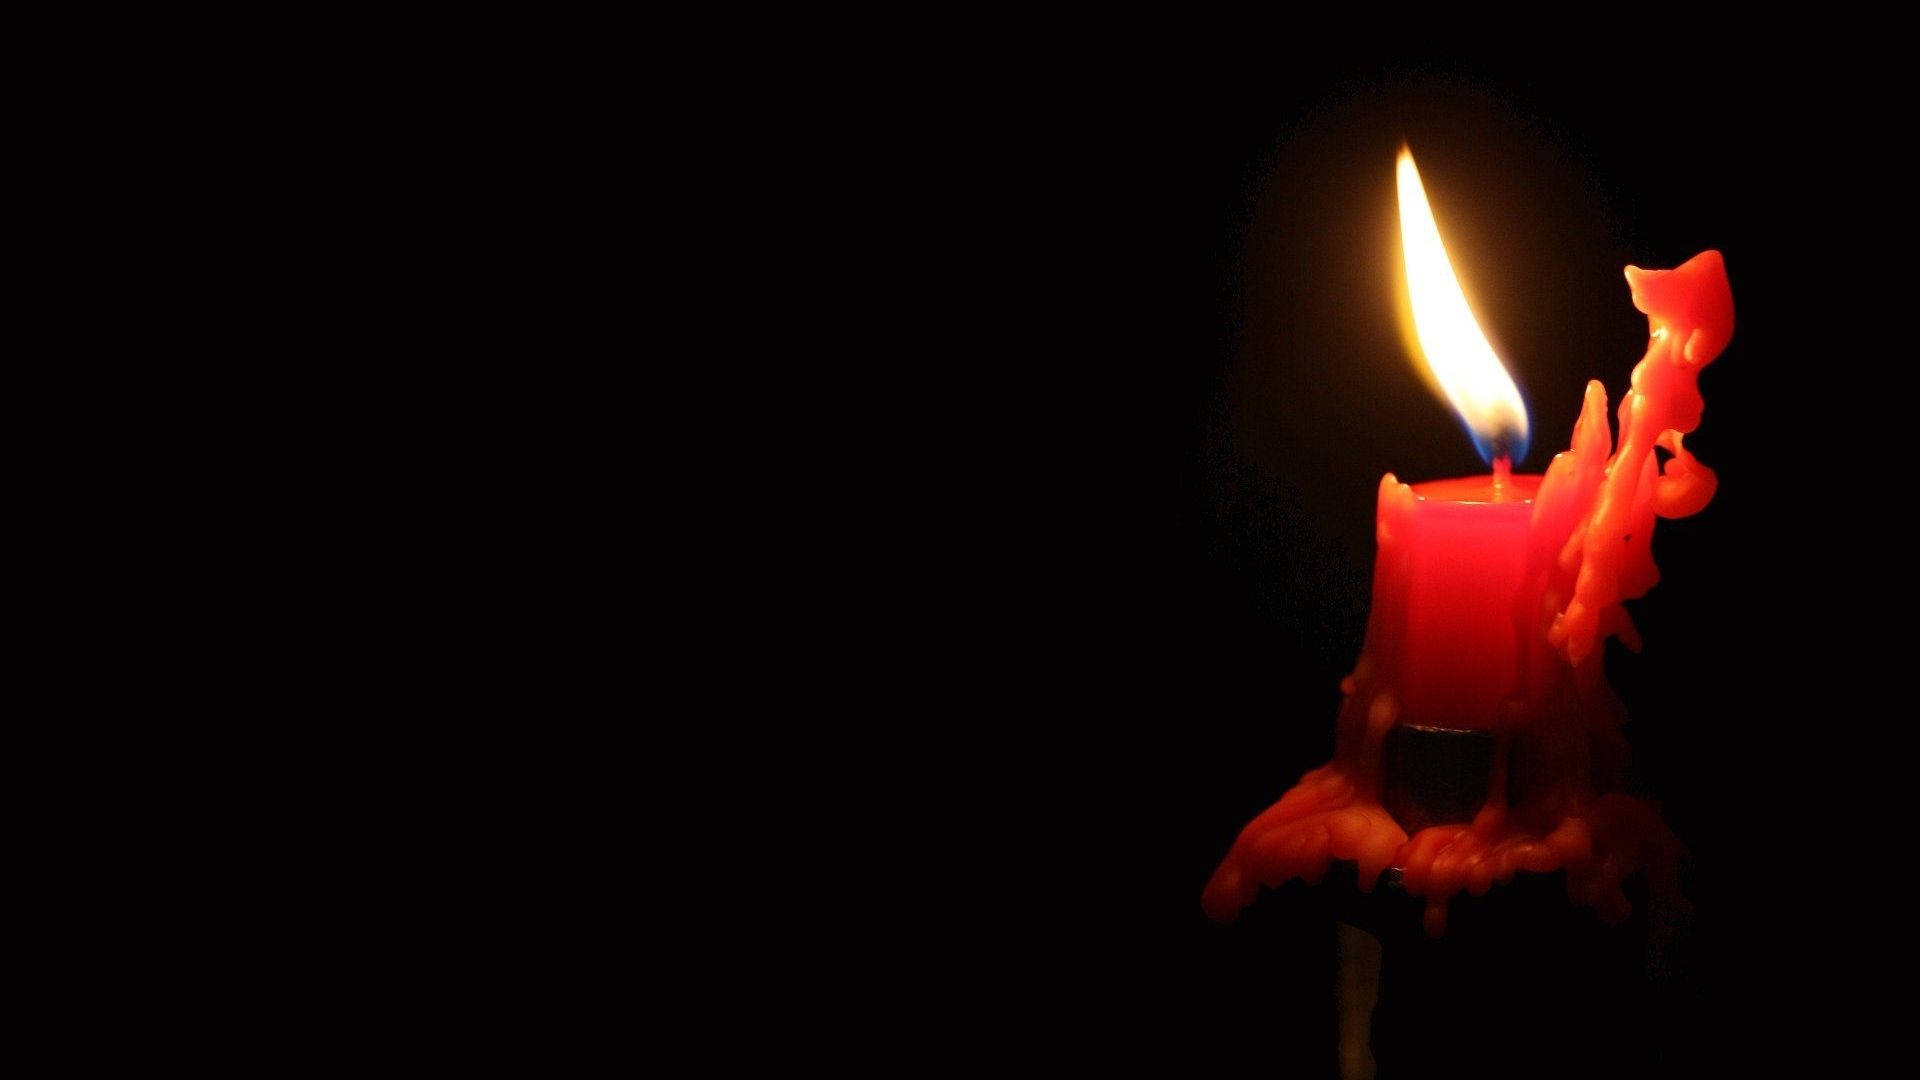 Burning Red Candle Wallpaper